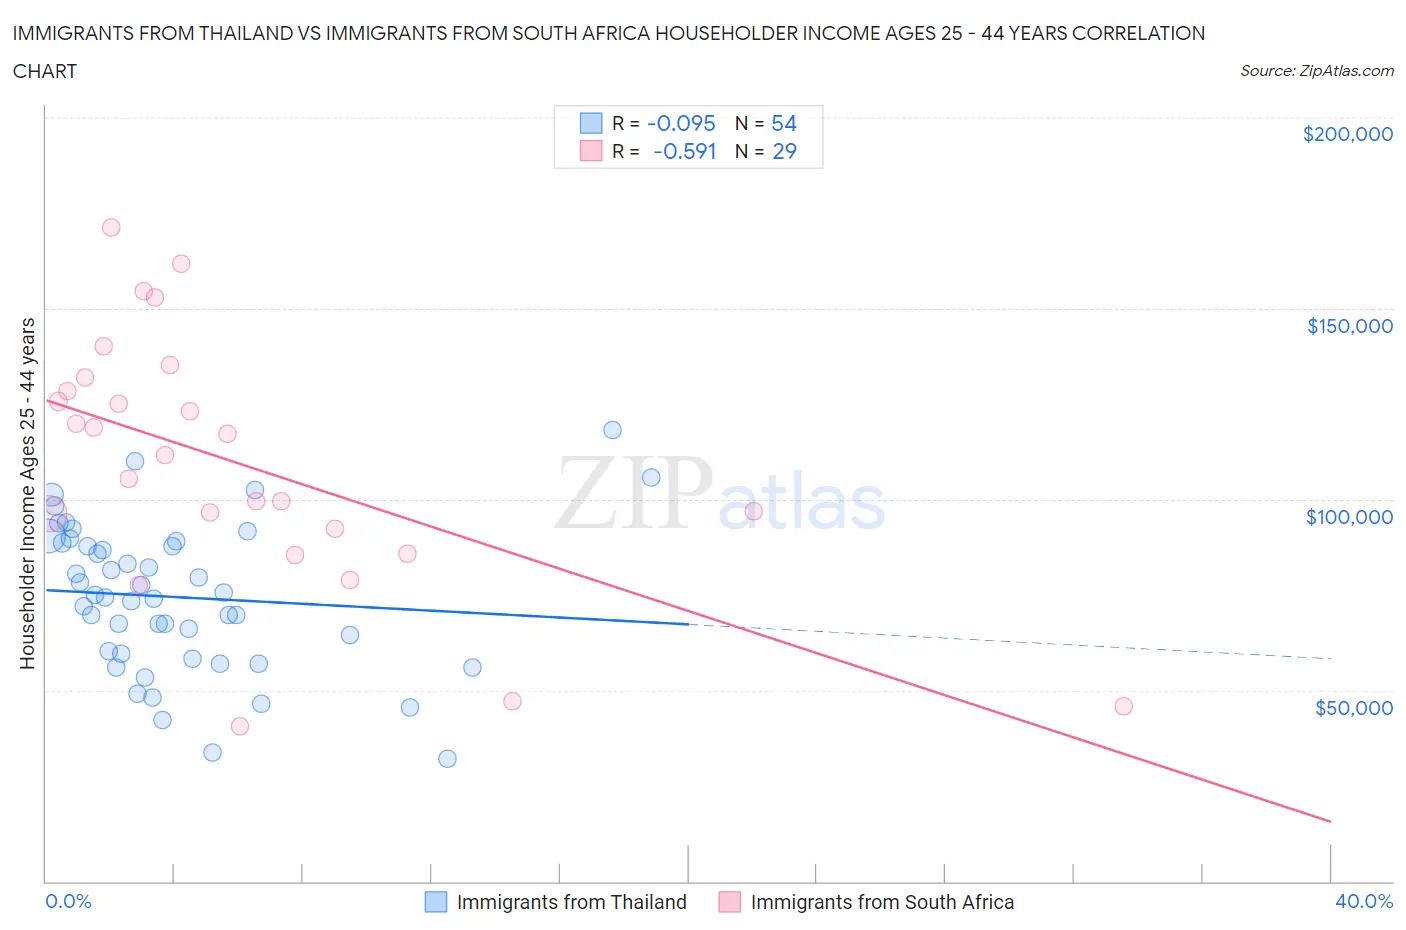 Immigrants from Thailand vs Immigrants from South Africa Householder Income Ages 25 - 44 years